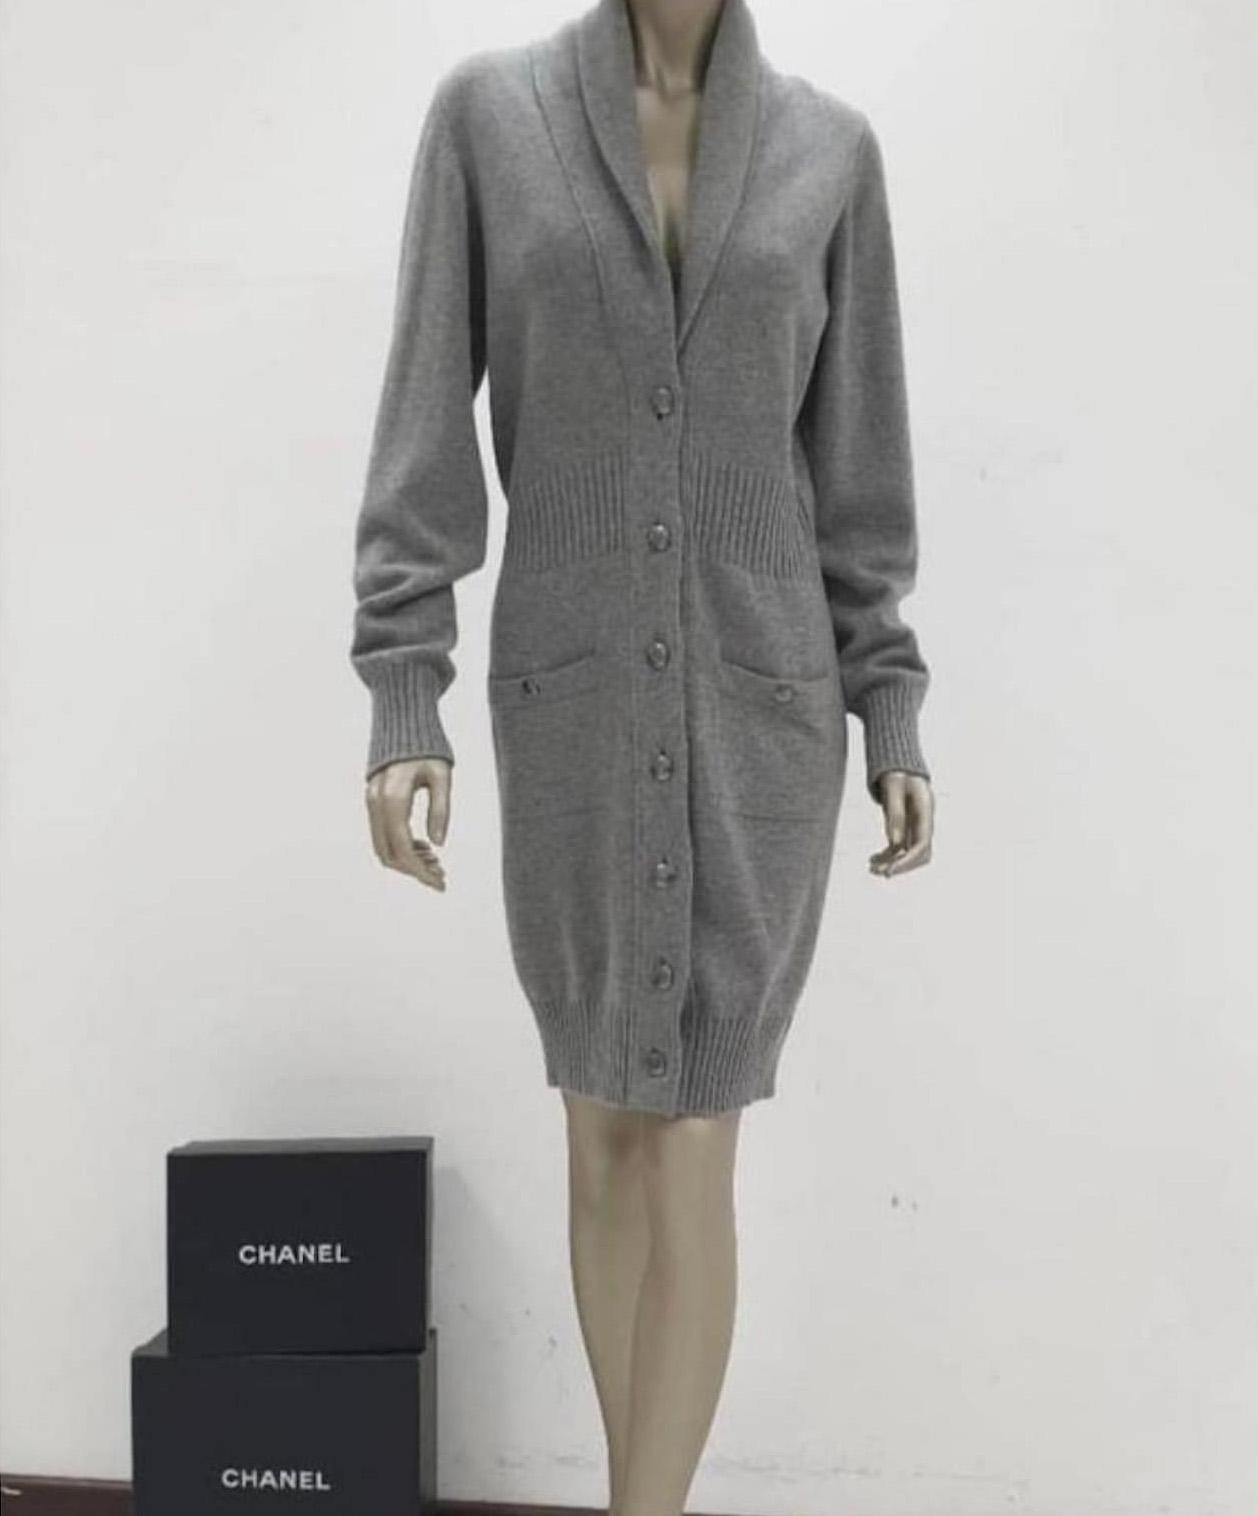 Chanel Claudia Schiffer Style CC Buttons Cashmere Cardigan For Sale 6